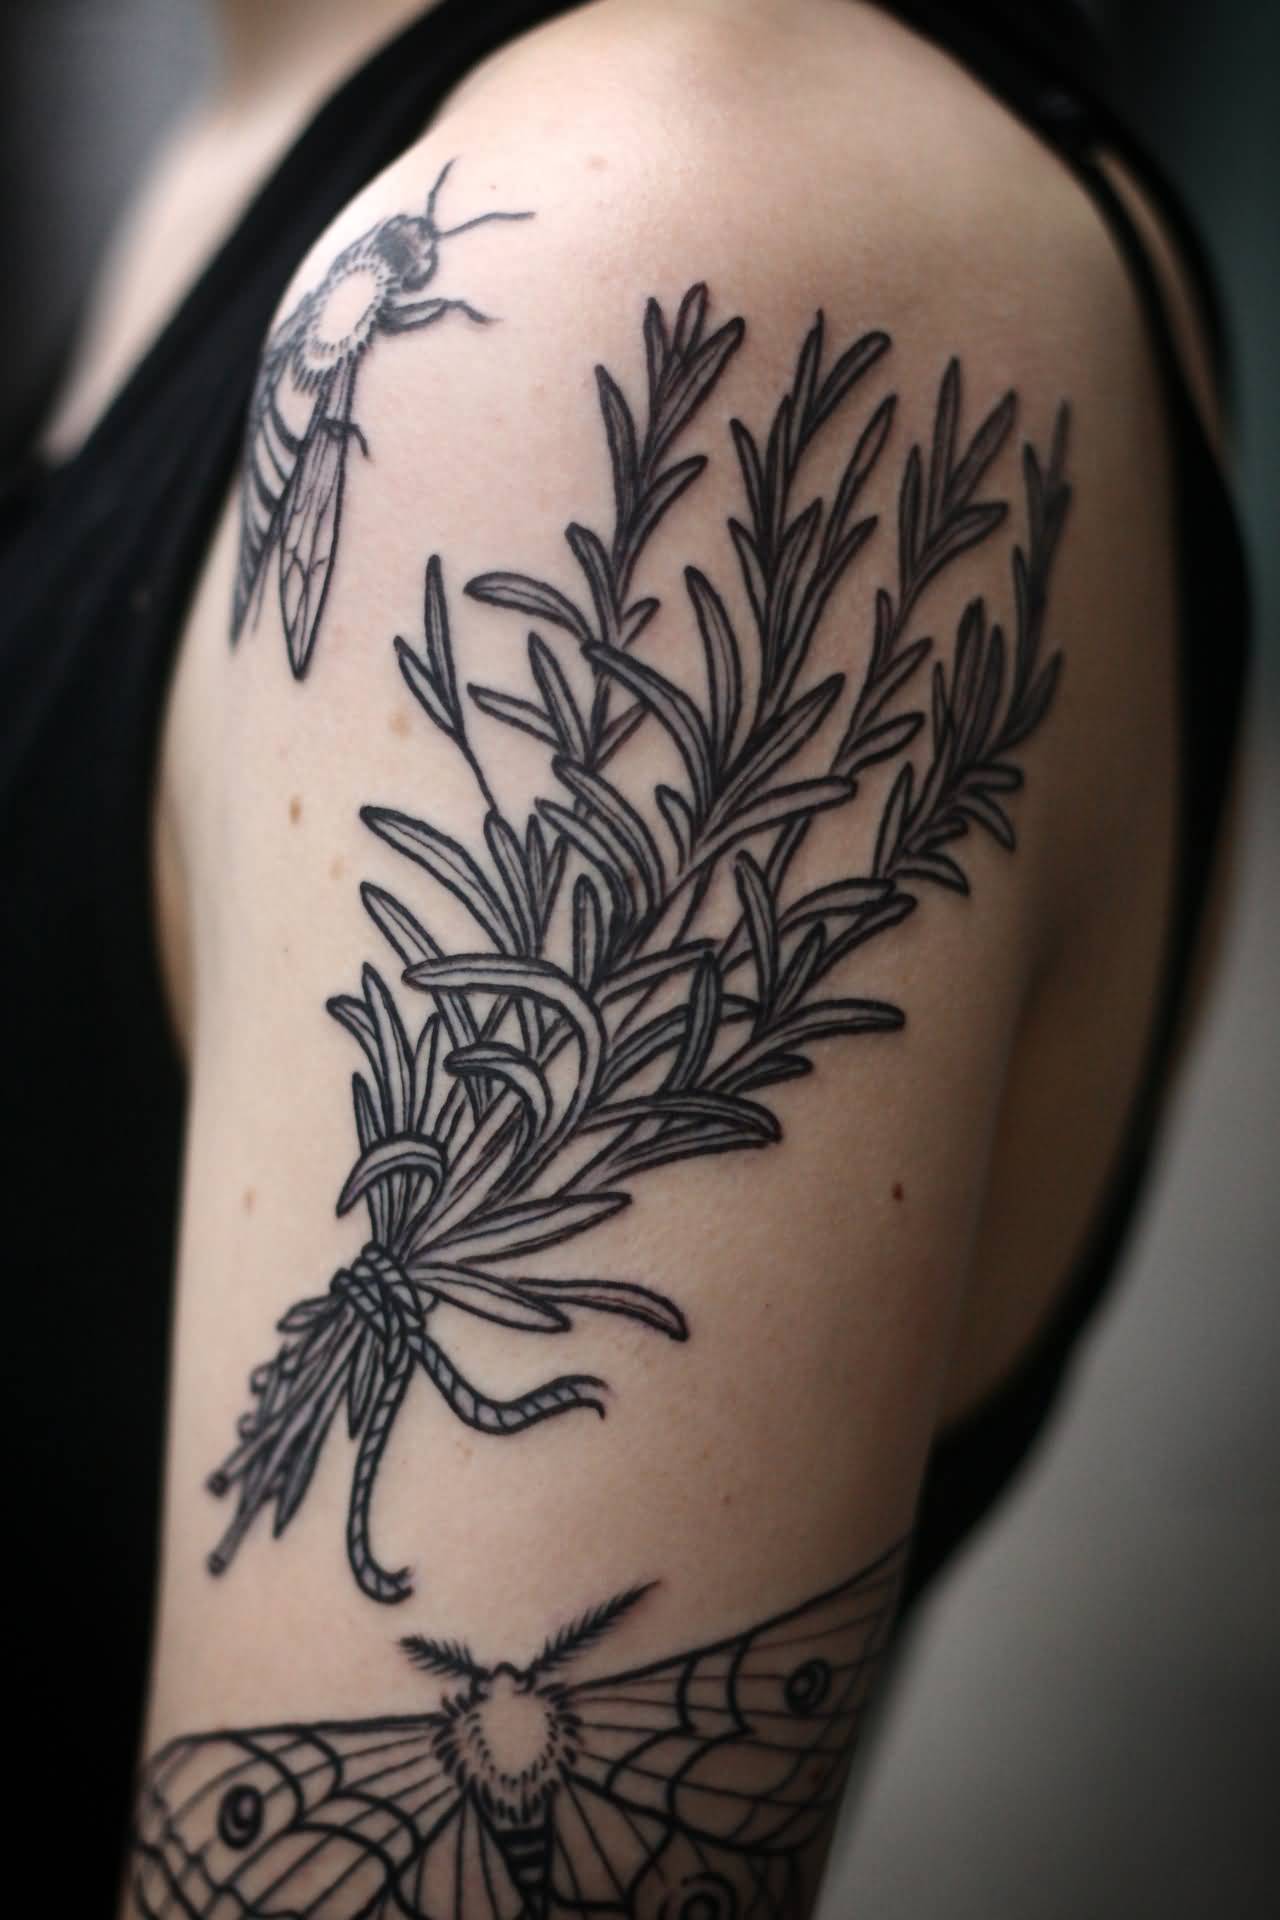 her new Tattoo | Salvia Tattoo only a few hours old | salendron | Flickr